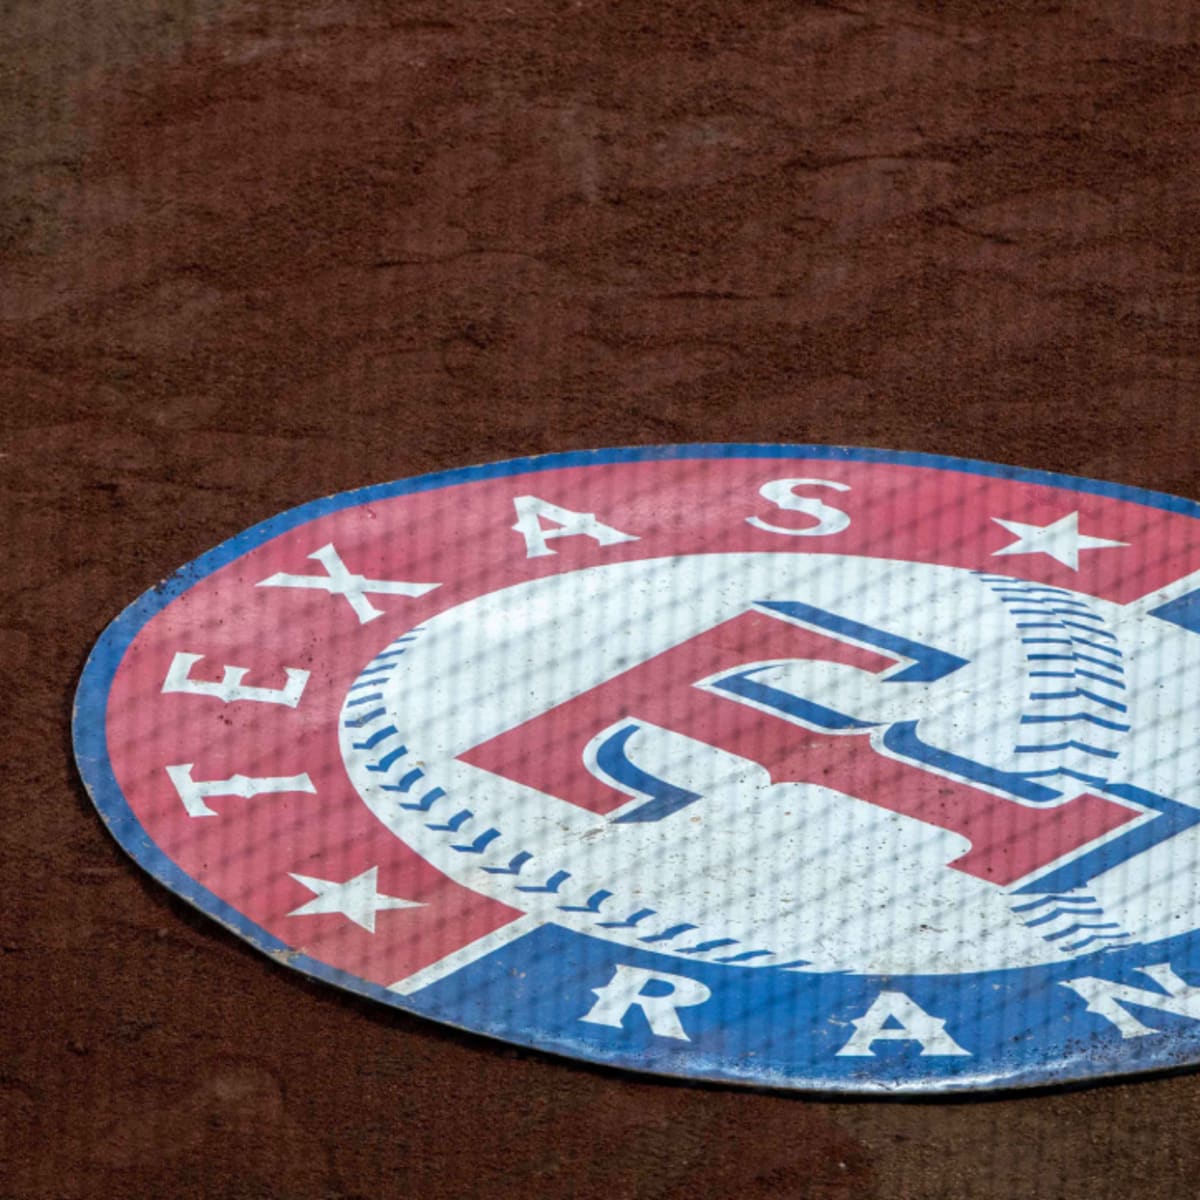 Texas Rangers unveil meaning behind City Connect uniforms - CBS